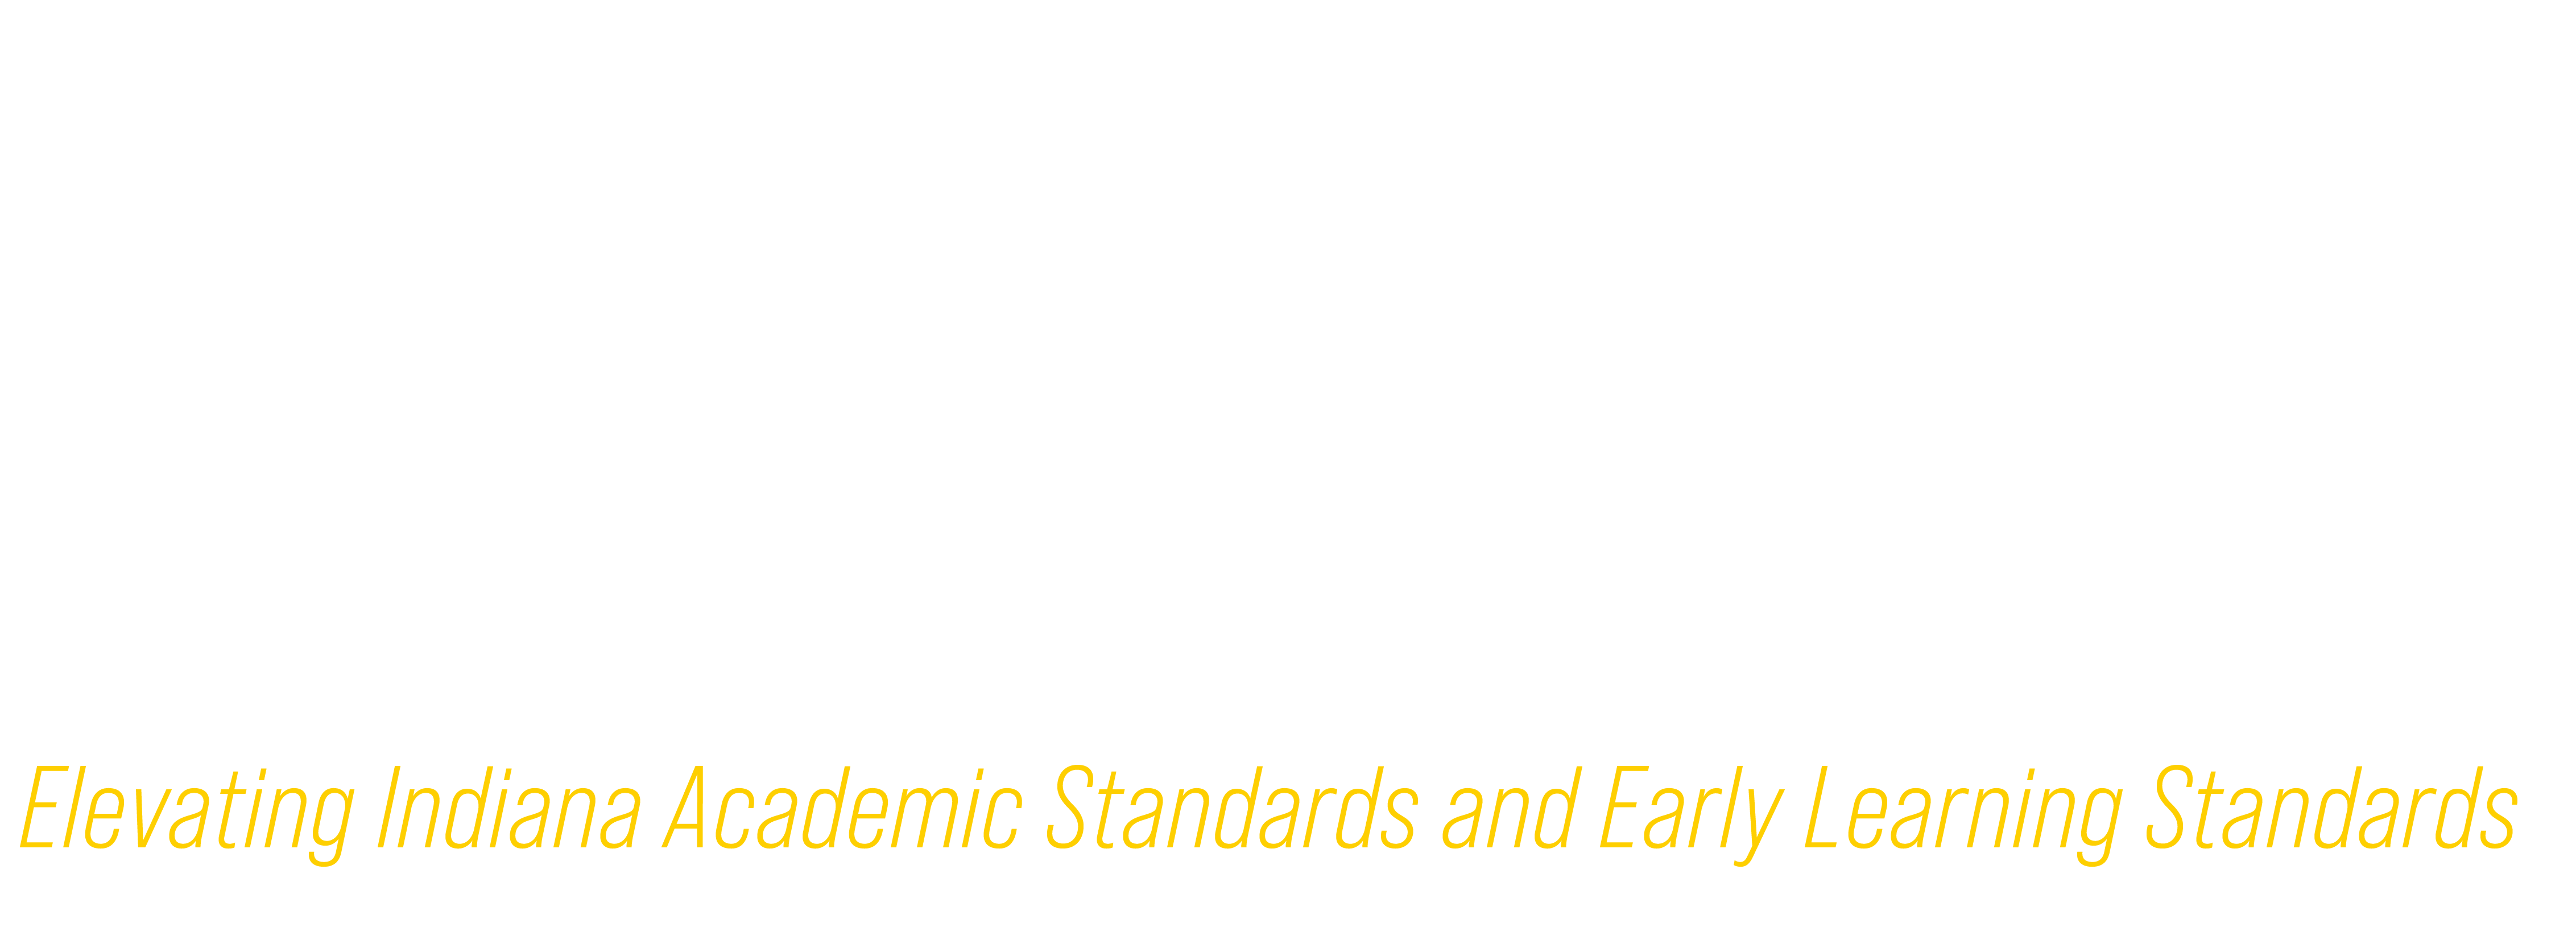 Future Focused Learning Series with Tagline - White and Yellow